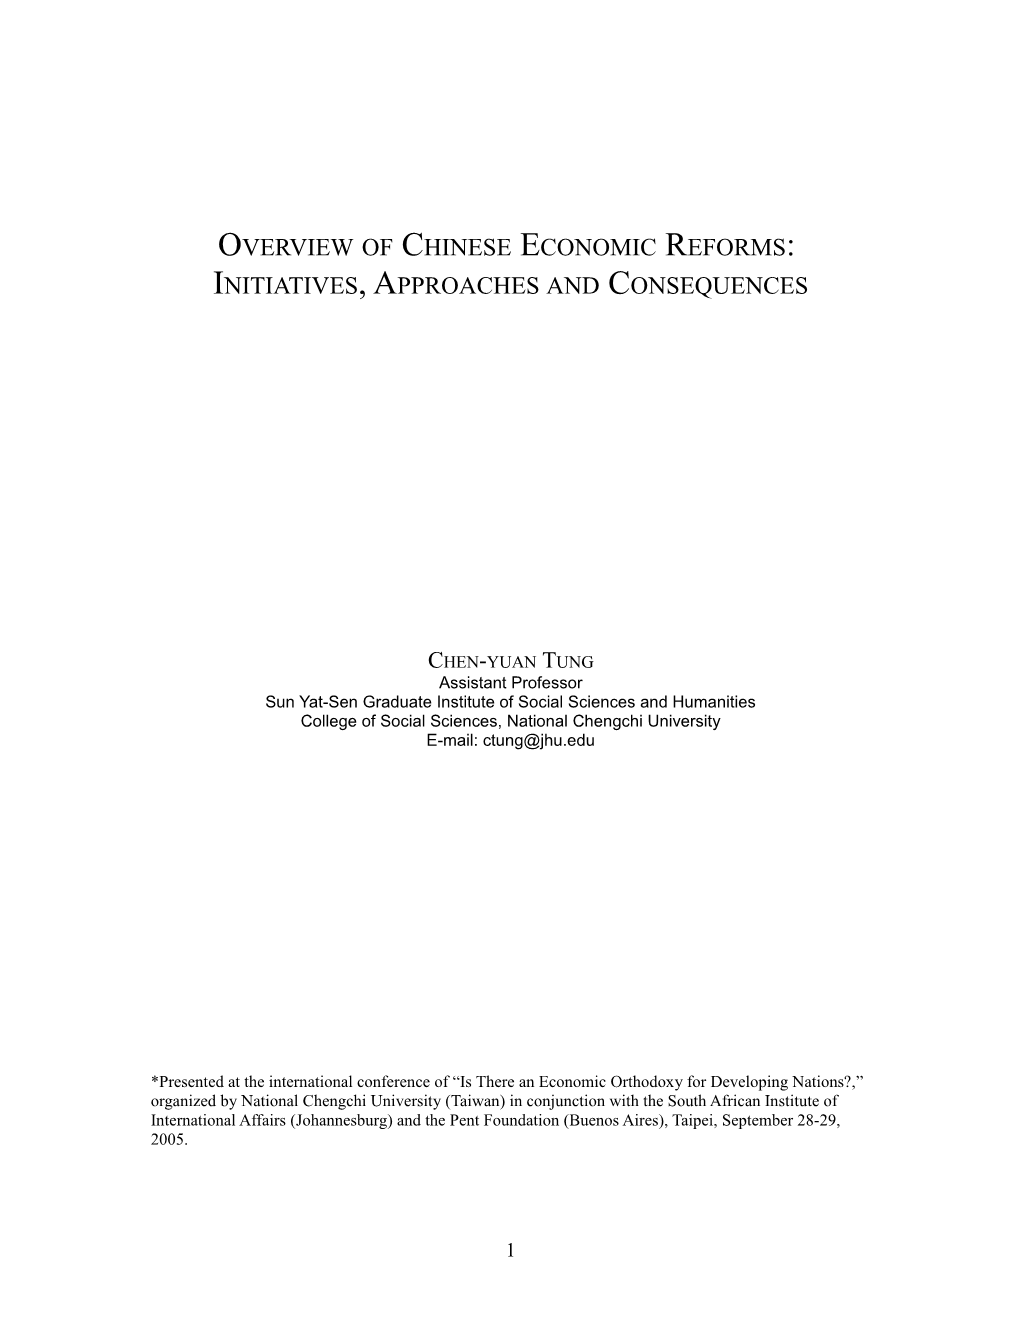 Outline Overview of Chinese Economic Reforms